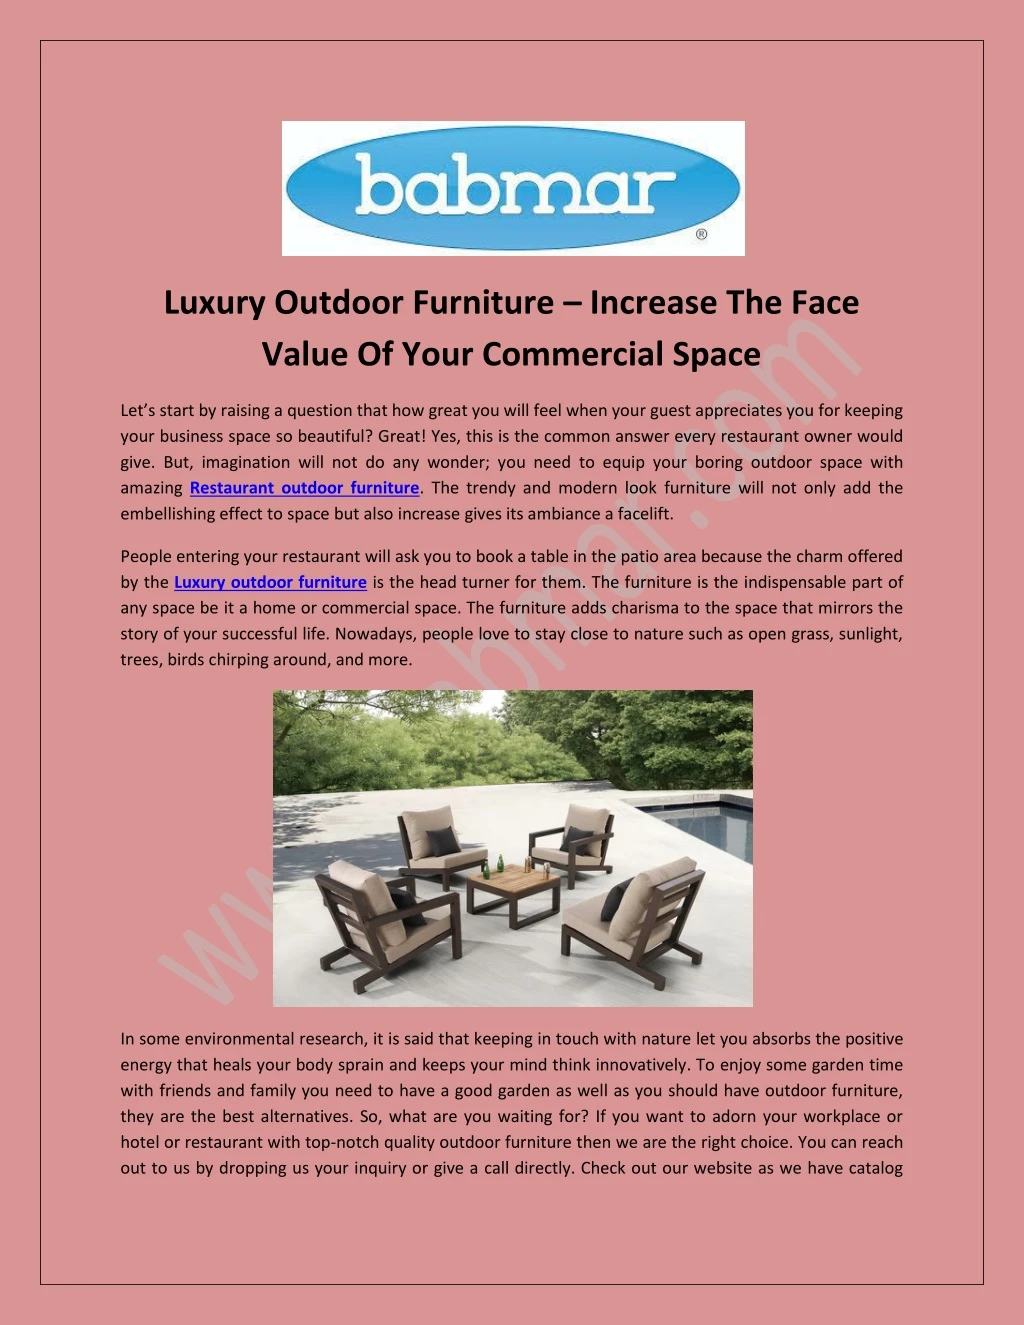 luxury outdoor furniture increase the face value